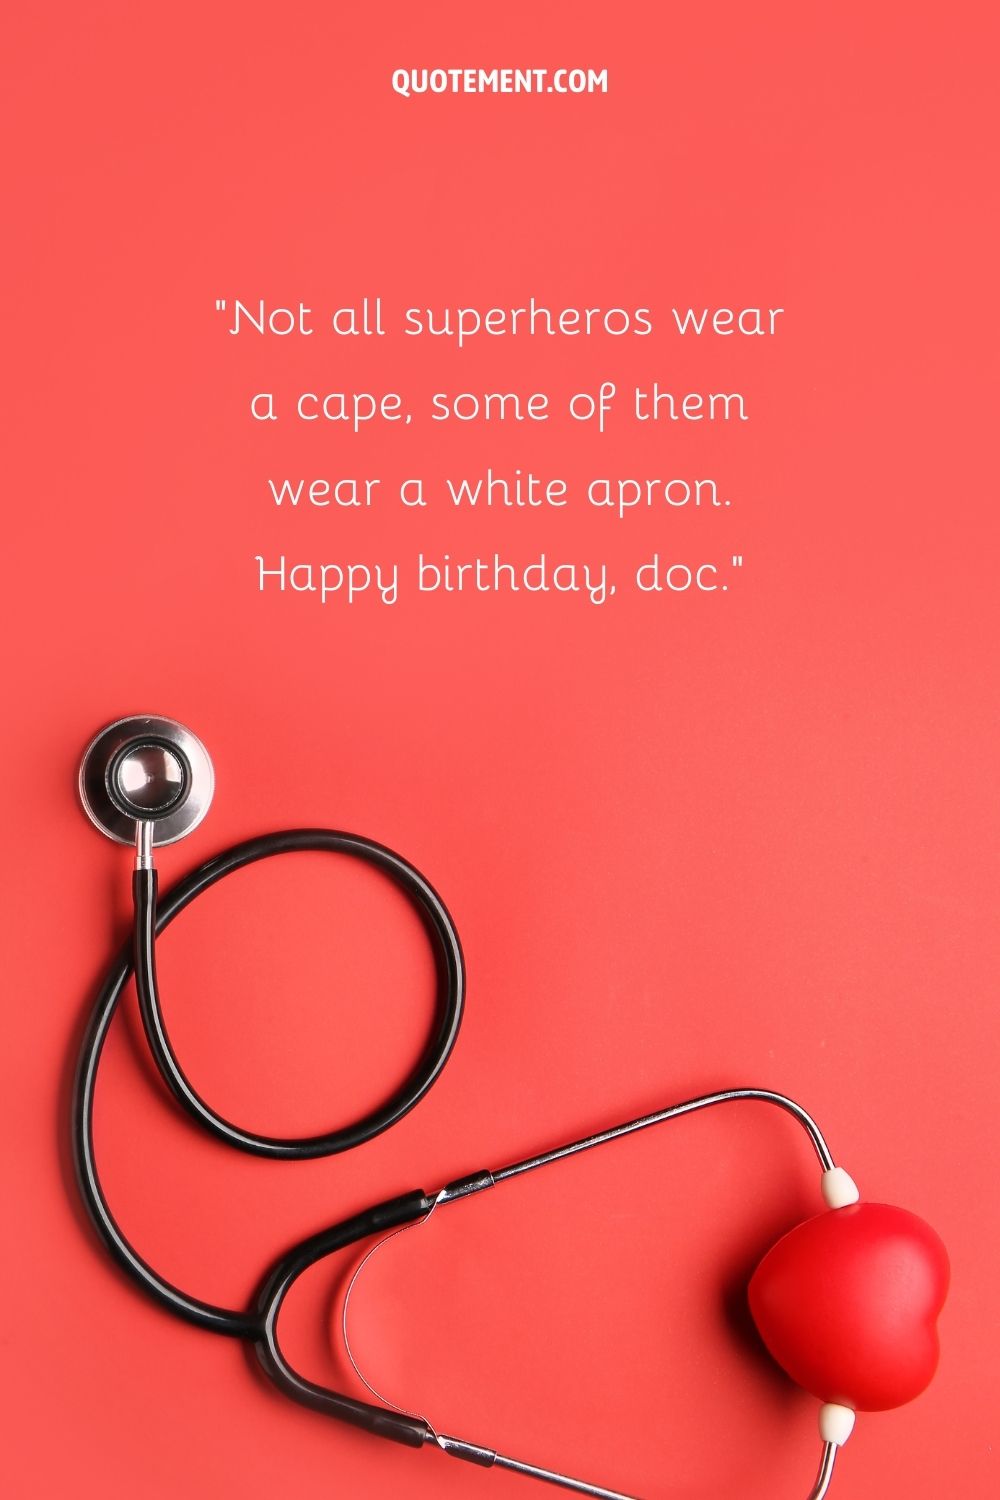 a stethoscope listening to a heart representing short birthday wishes for doctor